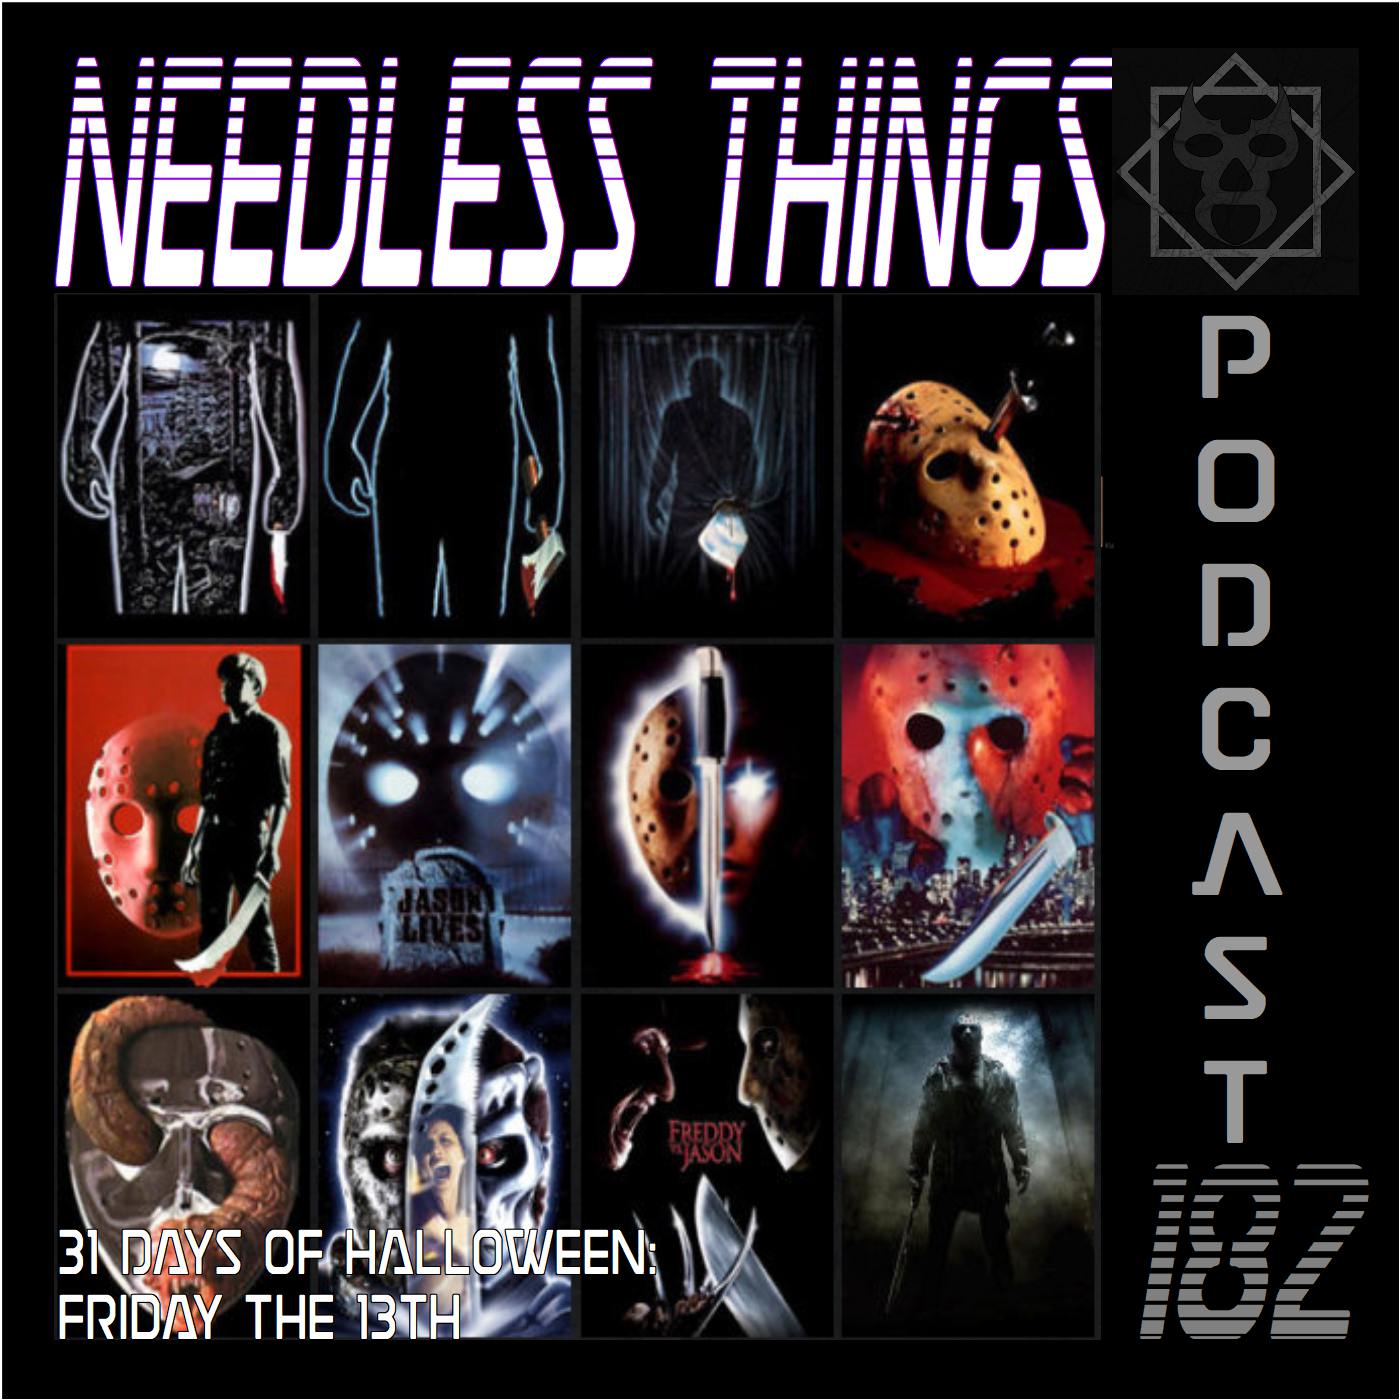 Needless Things Podcast 182 - 31 Days of Halloween: Friday the 13th